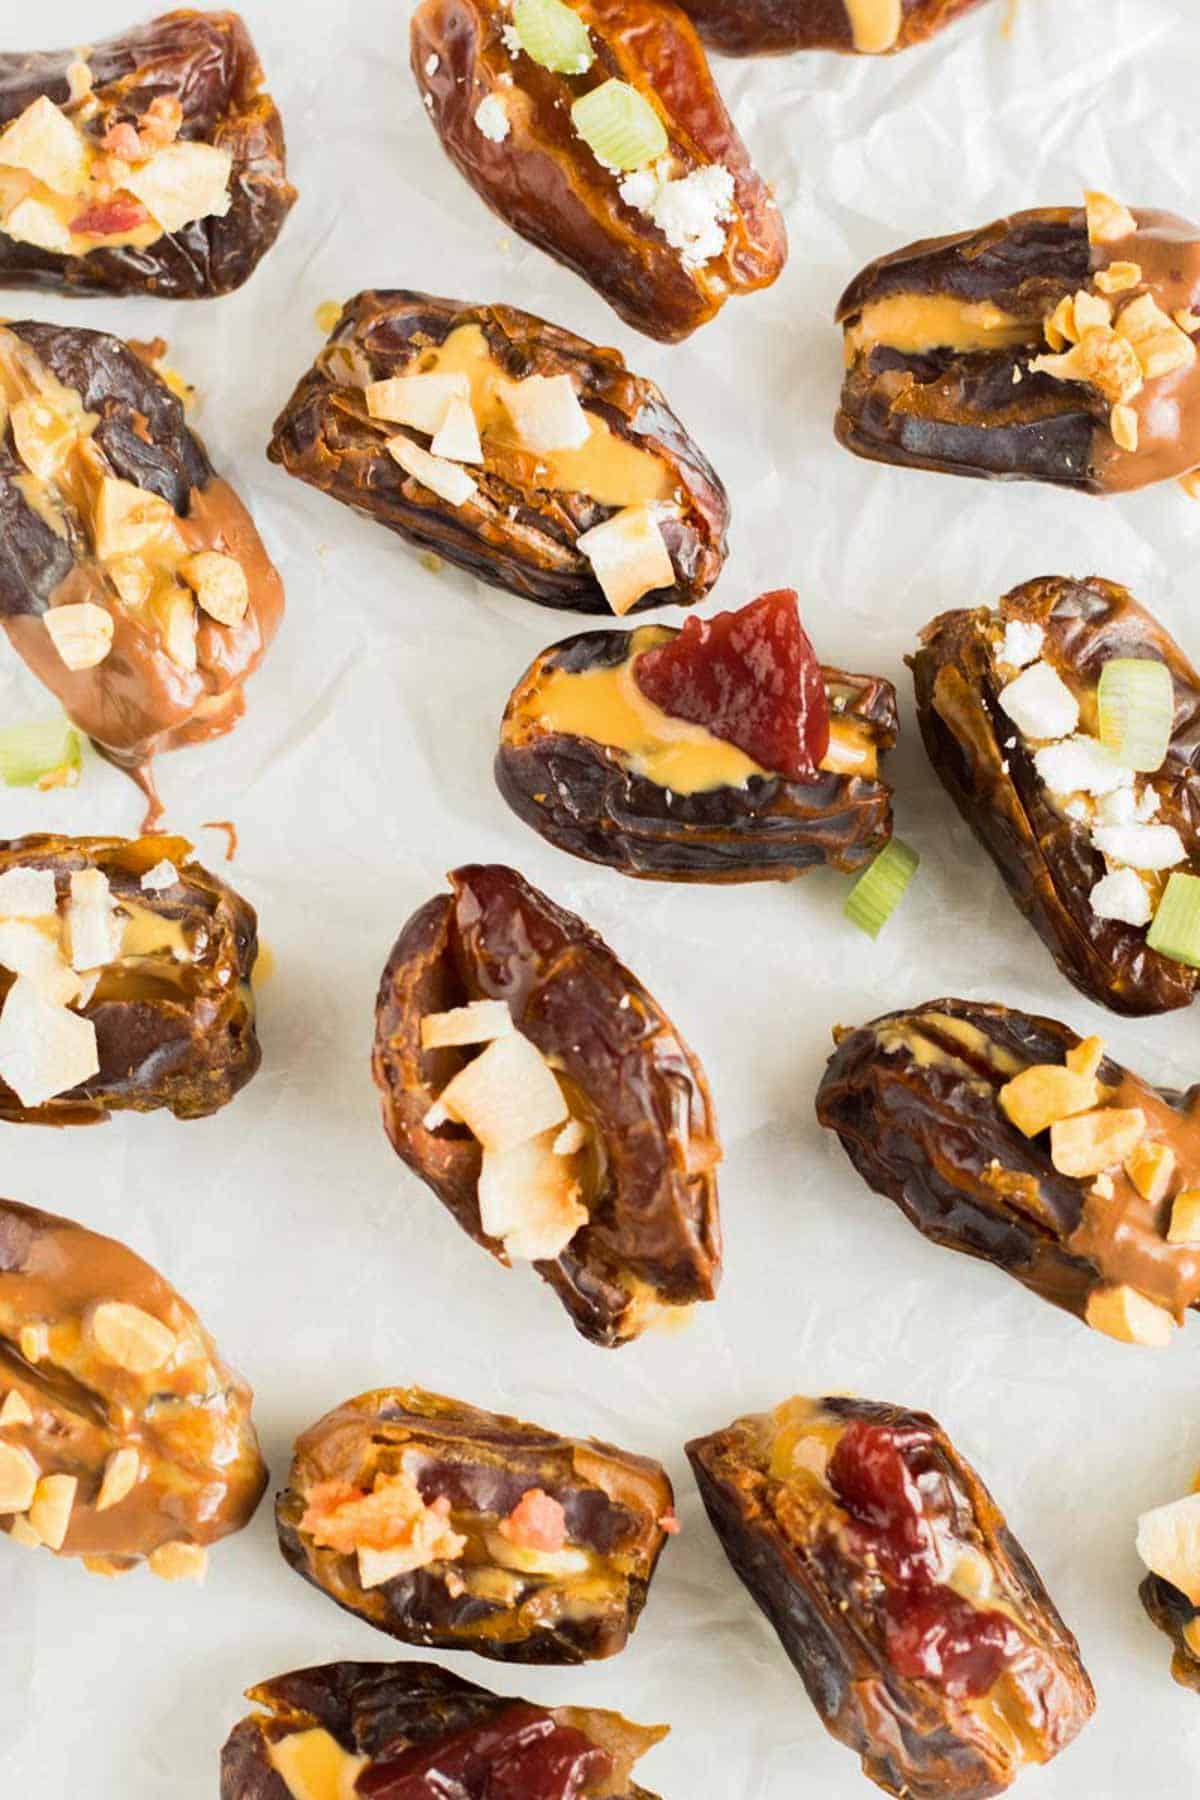 stuffed dates on white surface with jelly, goat cheese, onions, peanut butter, honey, and coconut